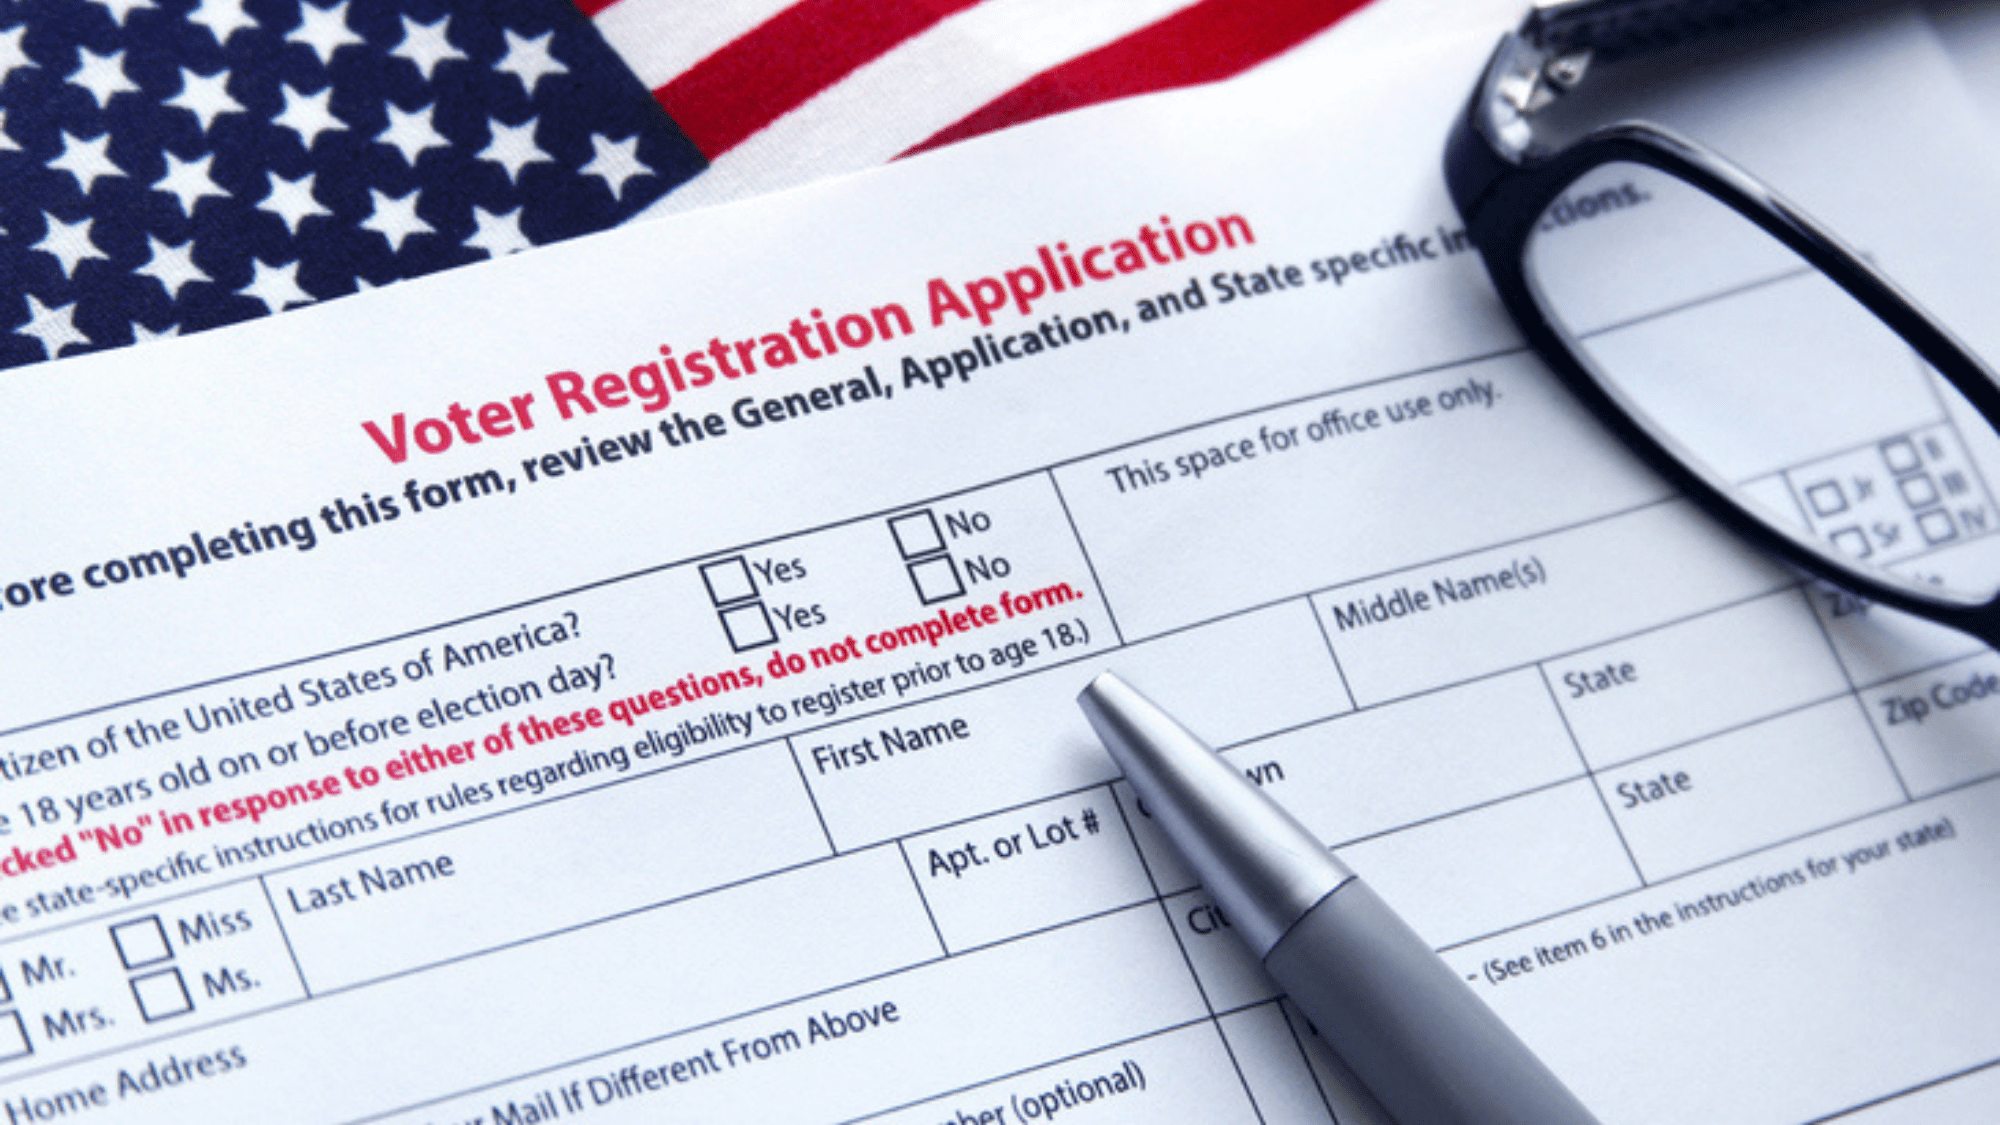 Featured image for “House passes same-day voter registration bill, photo ID not required”